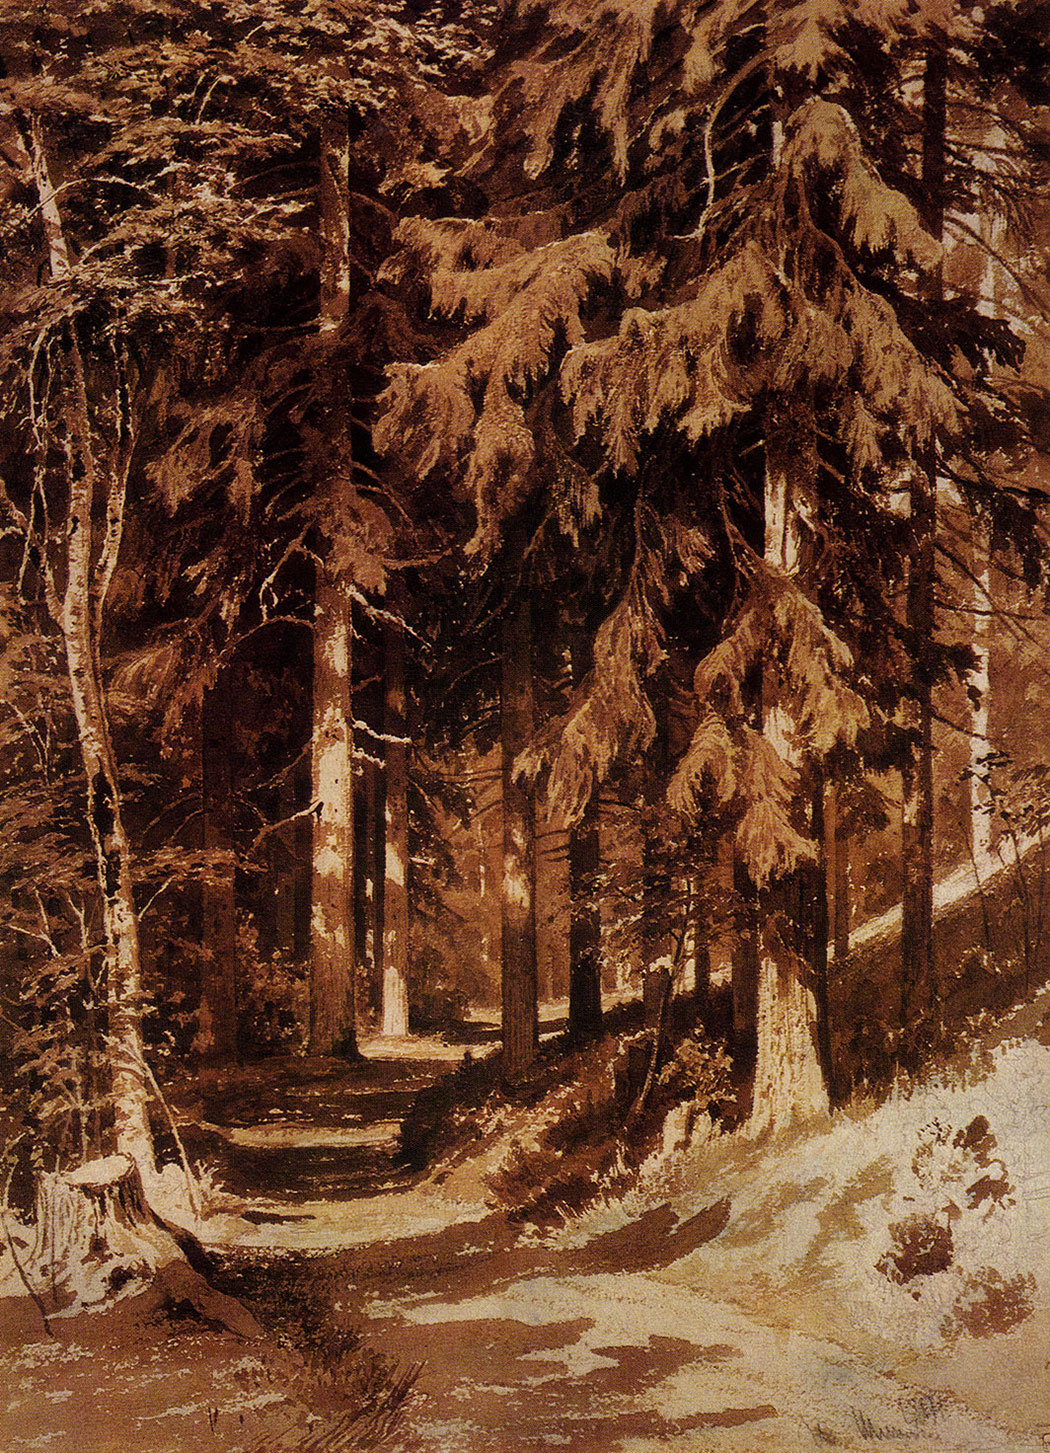 188. Footpath in the forest. 1891. Sepia and lead pencil on paper. 61.4X44.5 cm. The Russian Museum, Leningrad